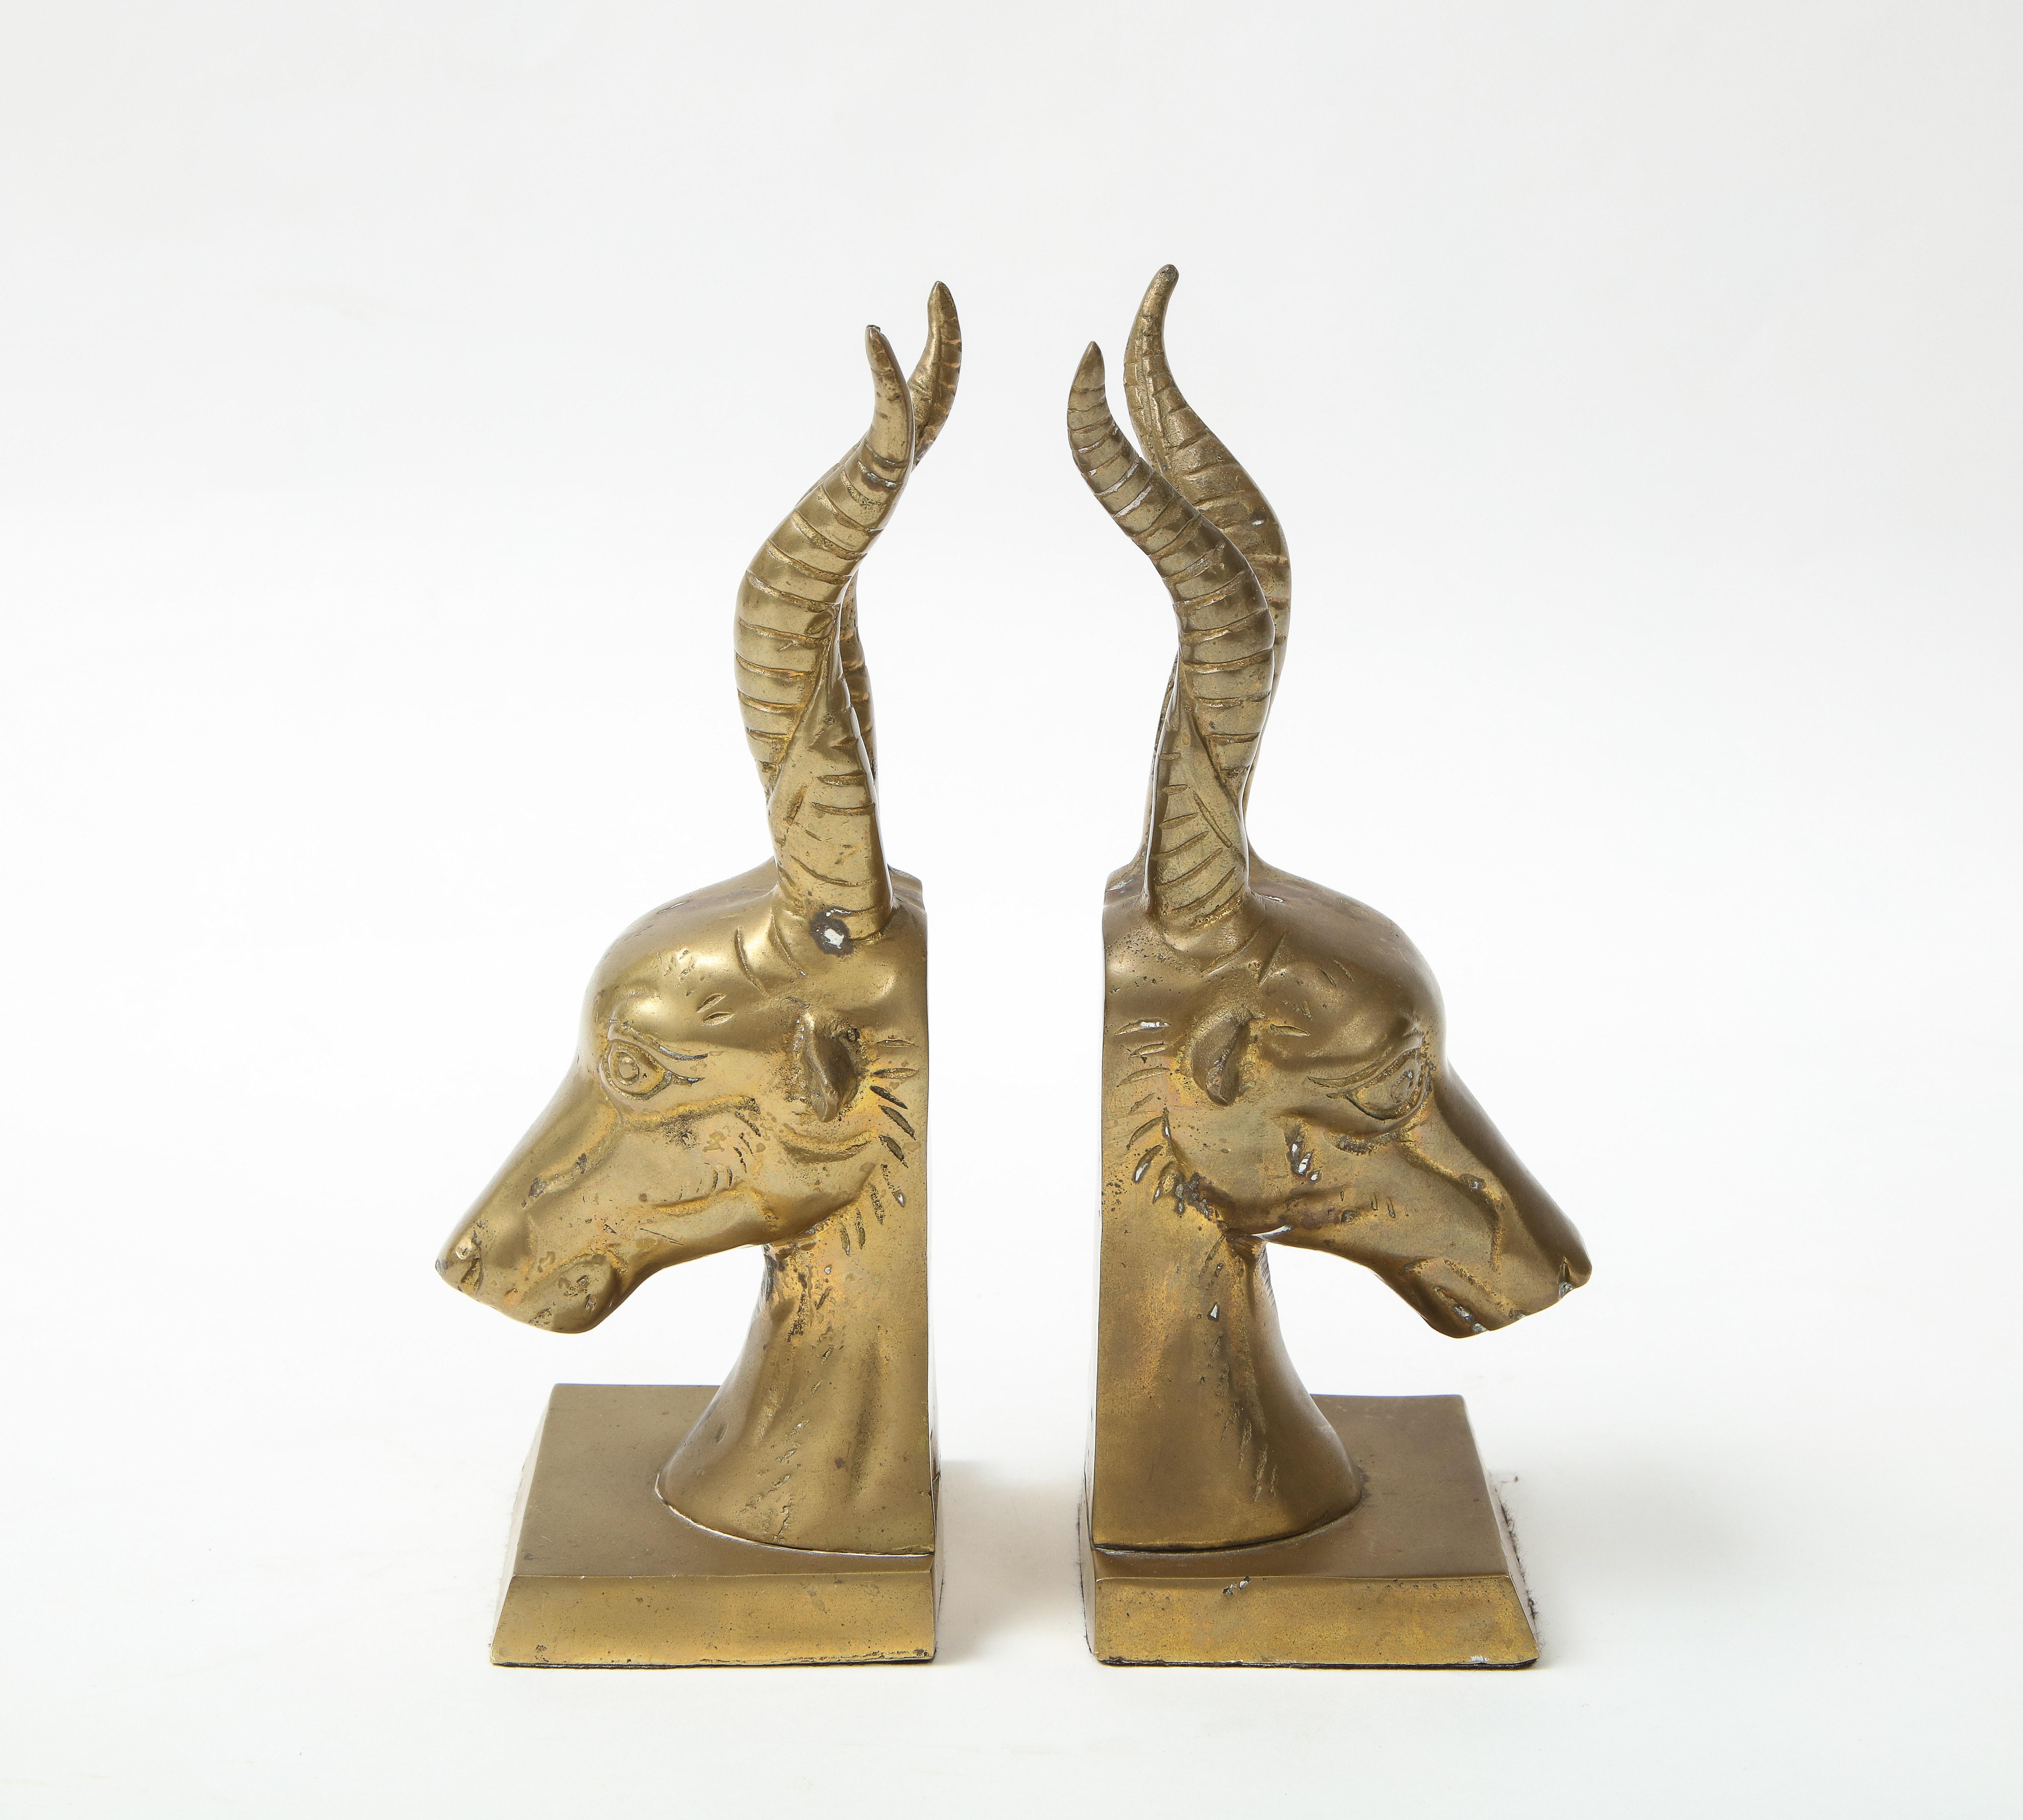 Mid century pair of cast bronze stylized goat bookends, felt protectors on bottoms.